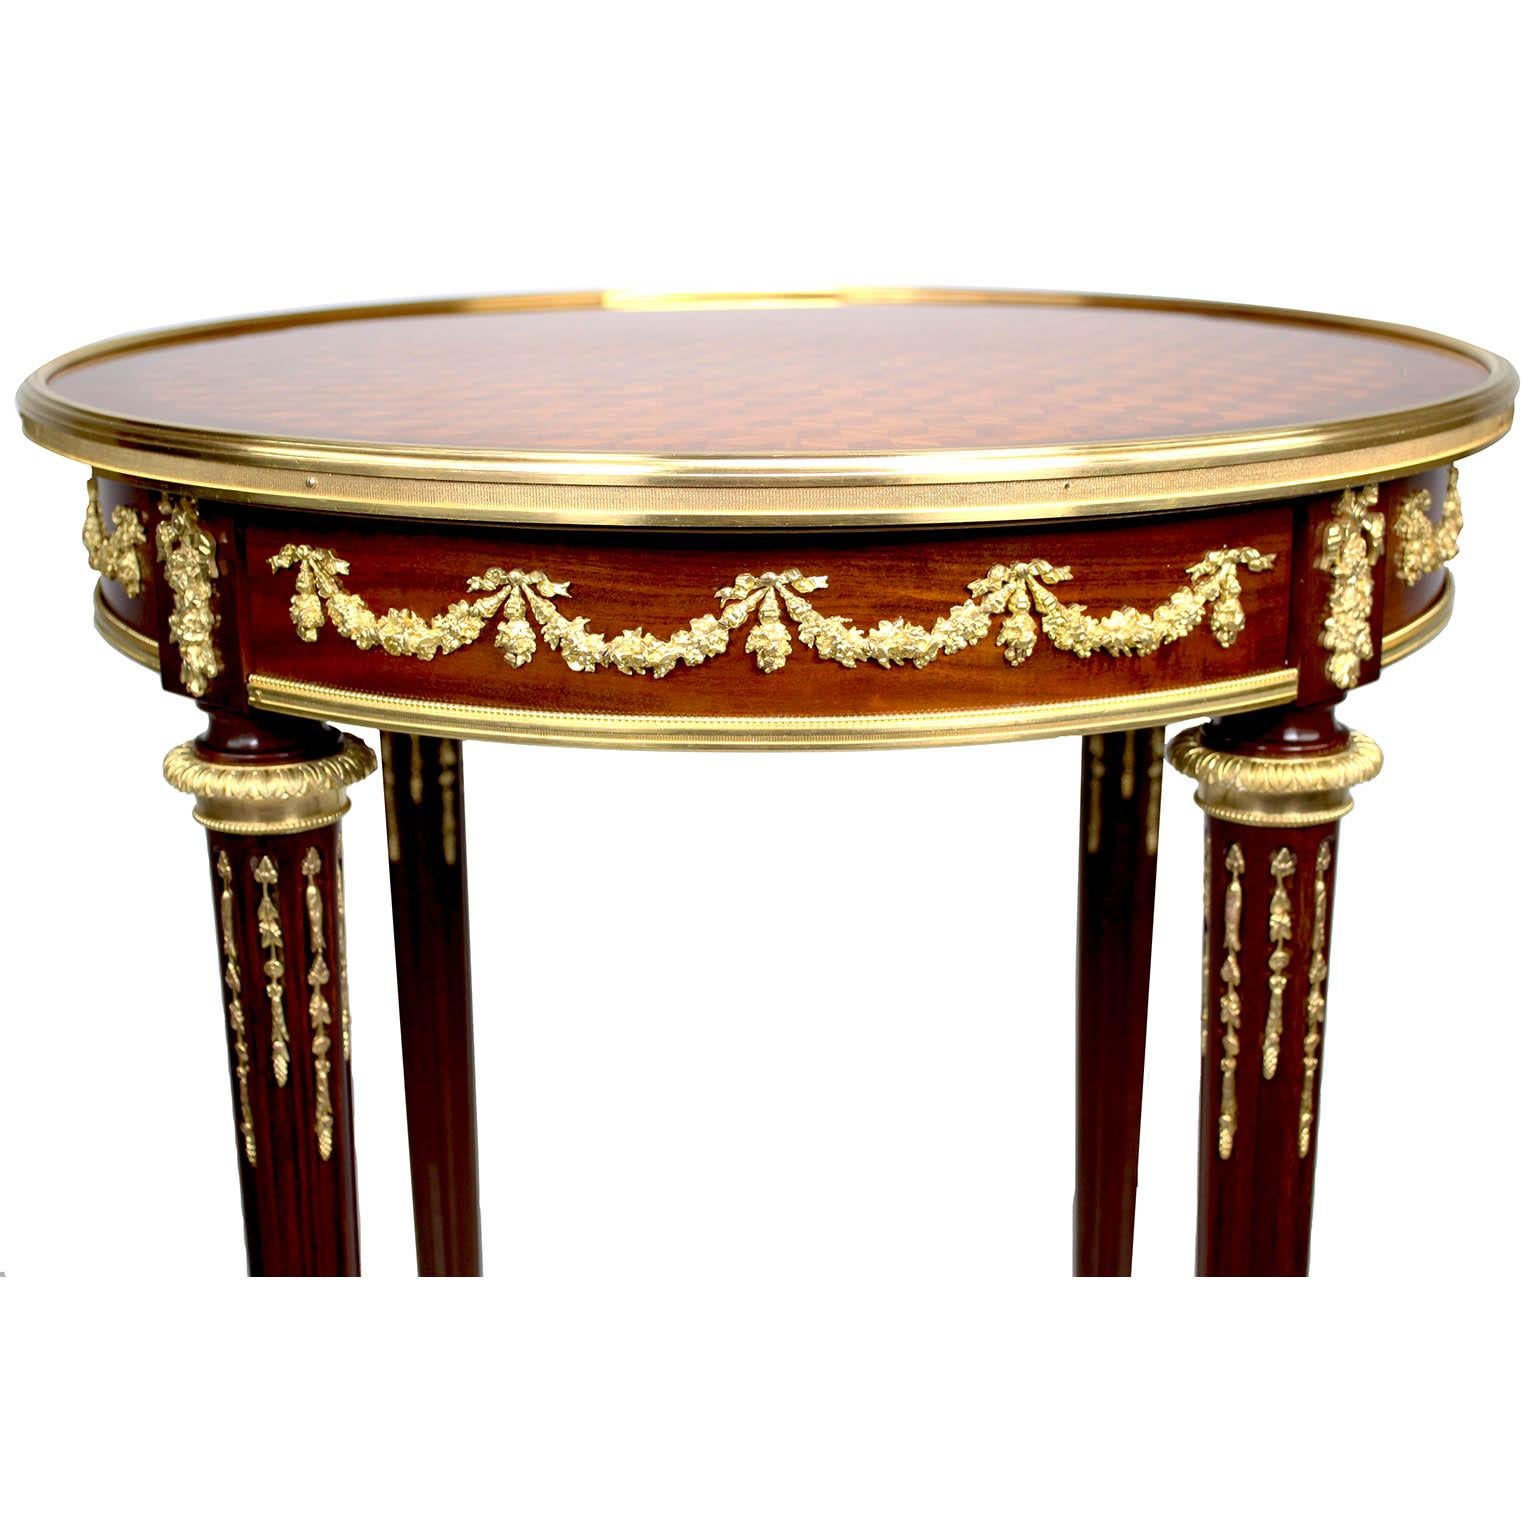 Belle Époque French Louis XV Style Ormolu & Parquetry Guéridon End Table by François Linke For Sale